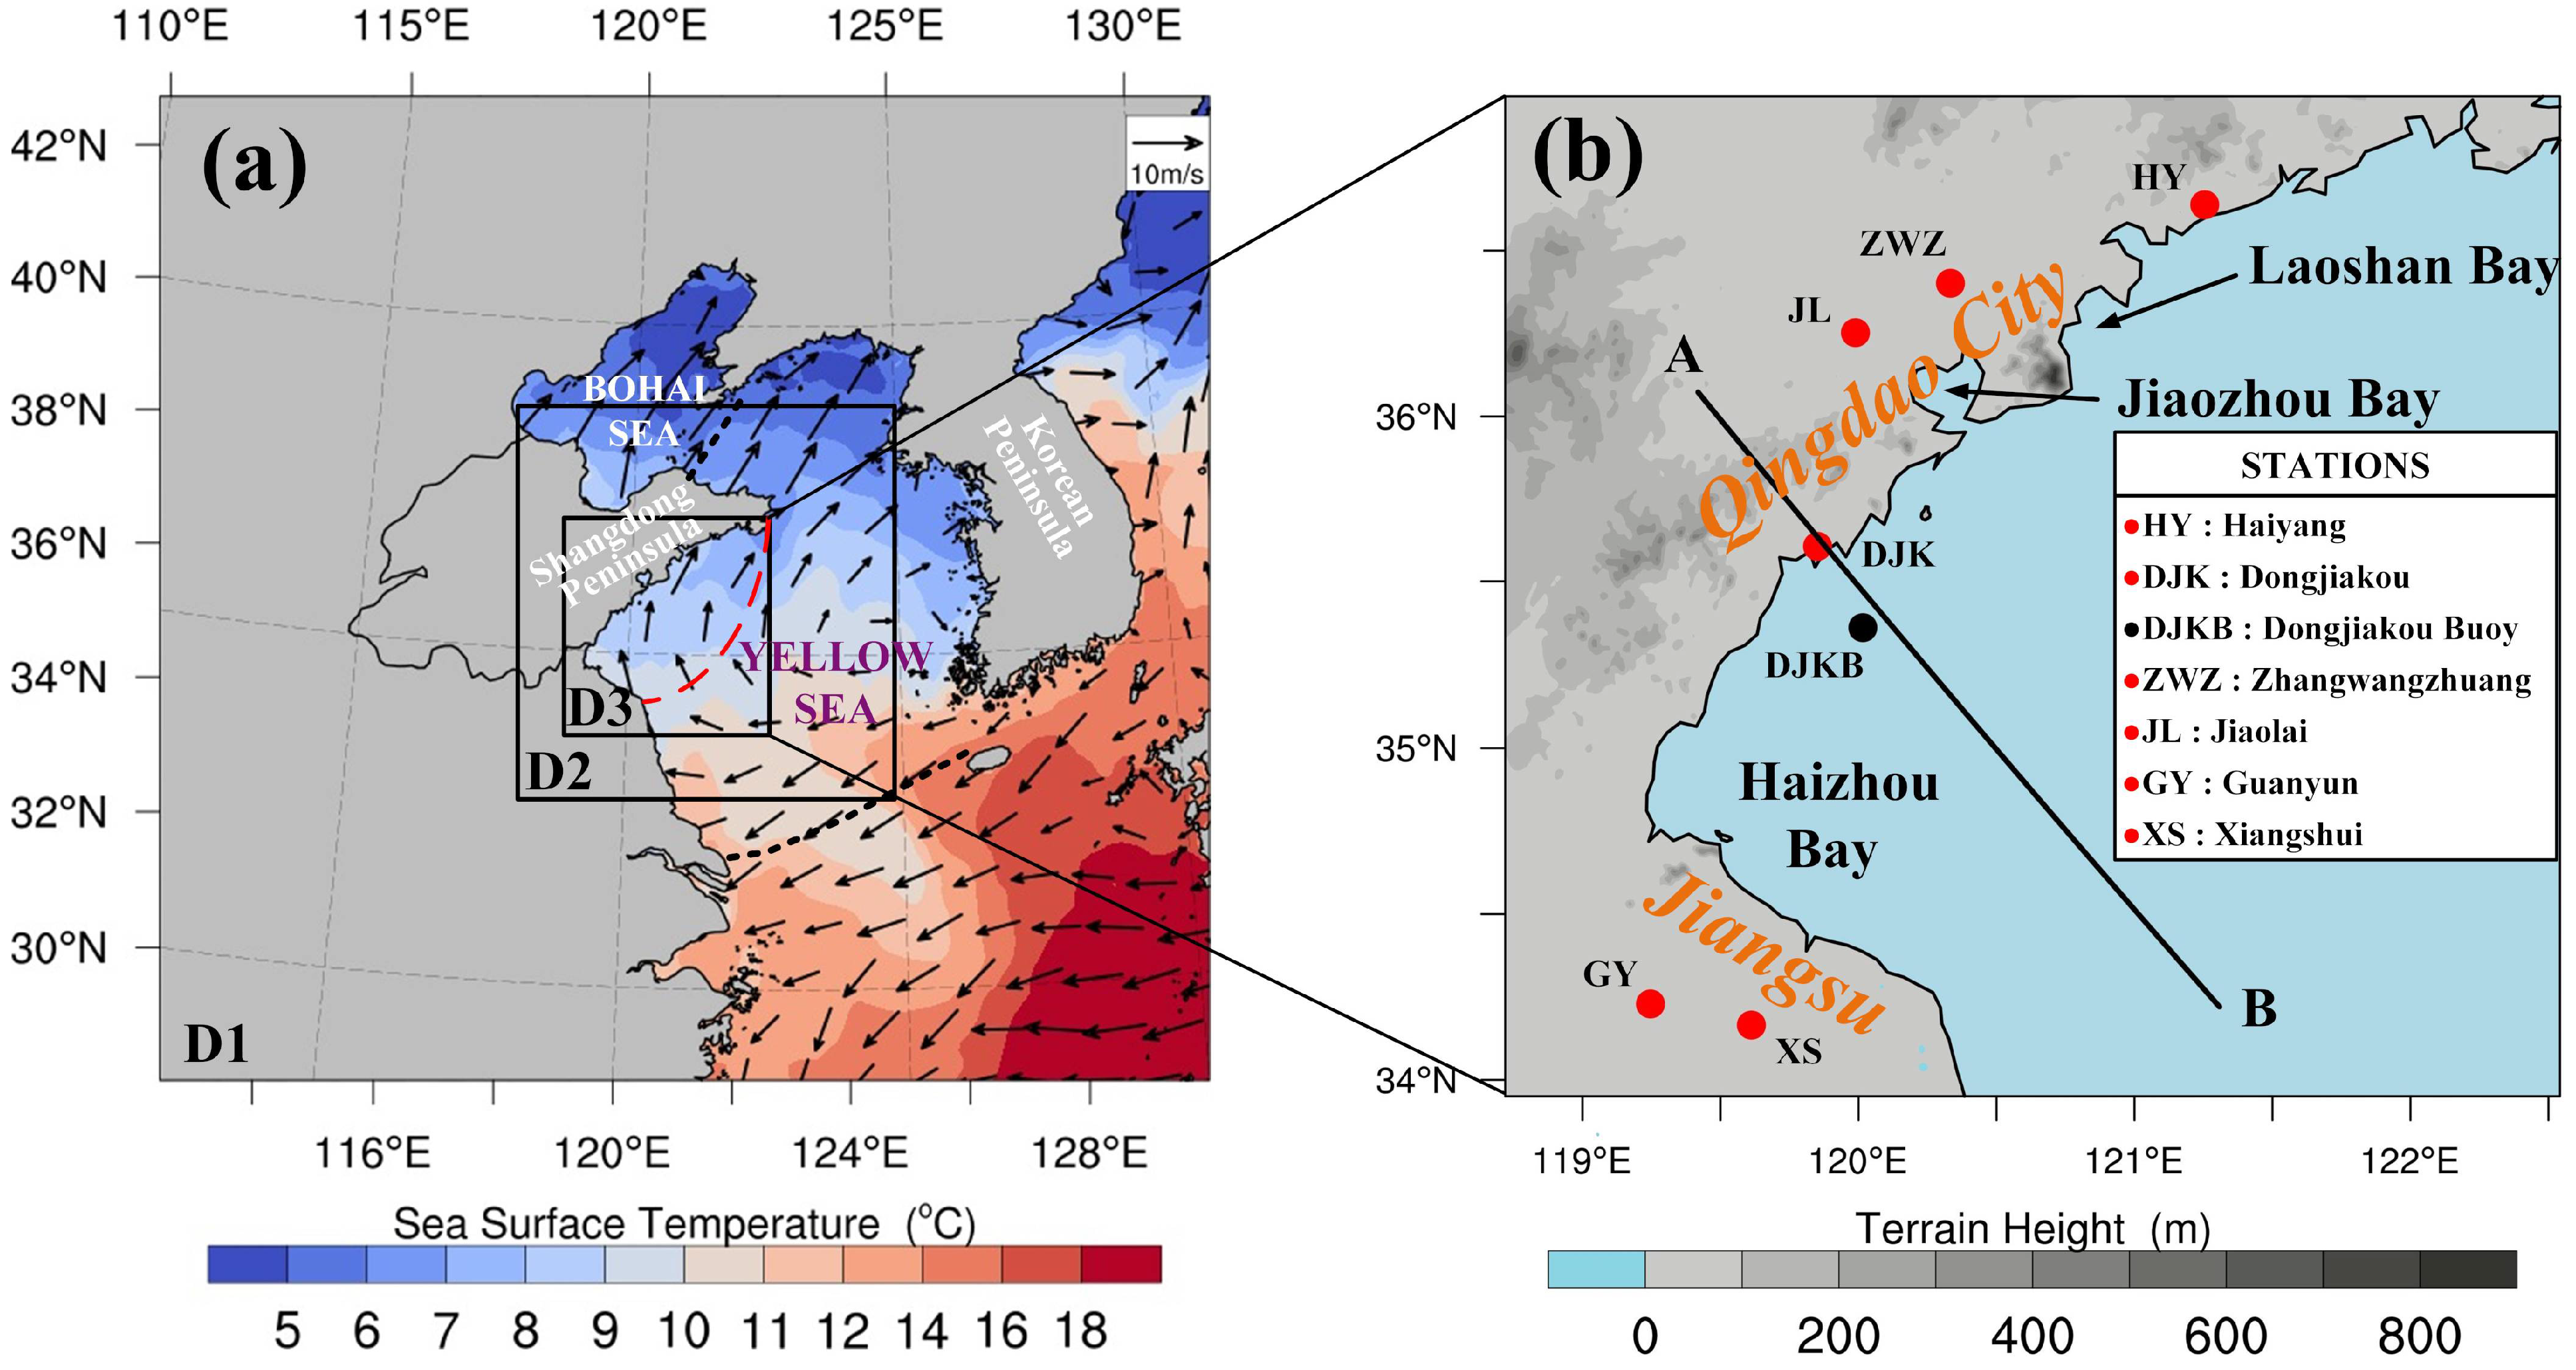 Full article: Different Generating Mechanisms for the Summer Surface Cold  Patches in the Yellow Sea